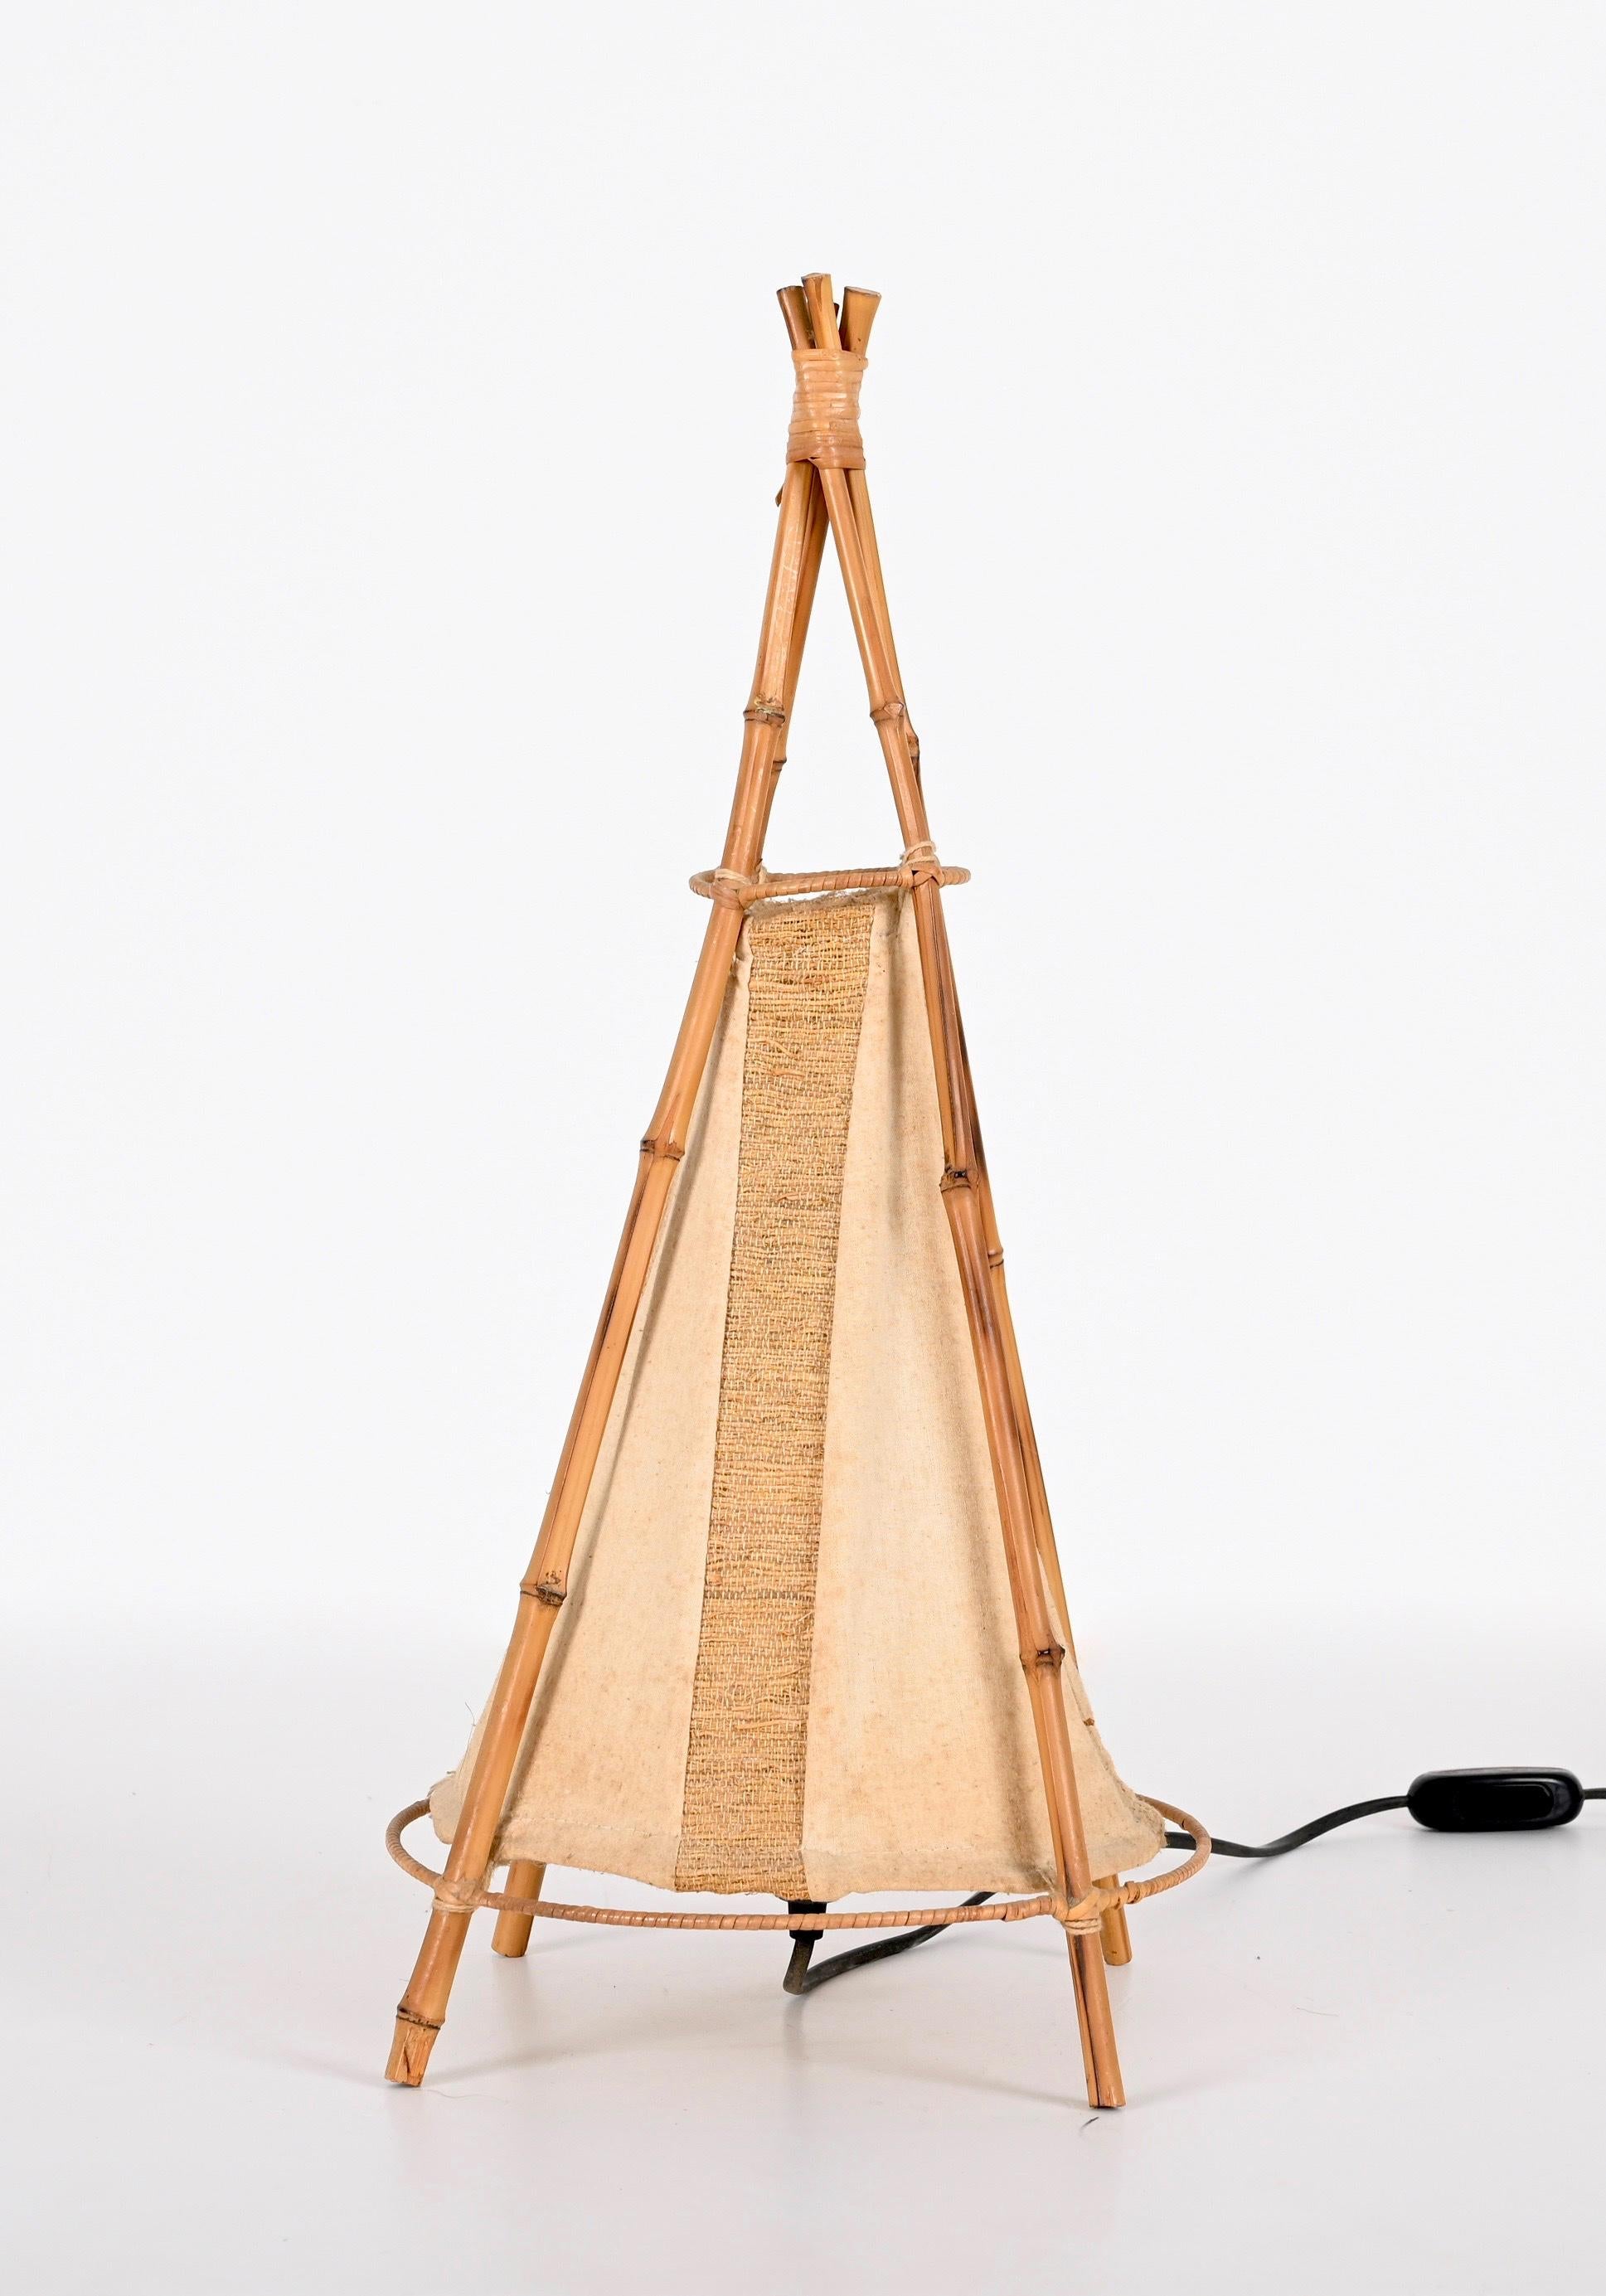 Wonderful mid-century American Indian tent-shaped table lamp in bamboo and rattan. This excellent piece was made in Italy during the 1960s in the style of Louis Sognot.

The outer structure is made up of four bamboo and rattan bamboo stems that